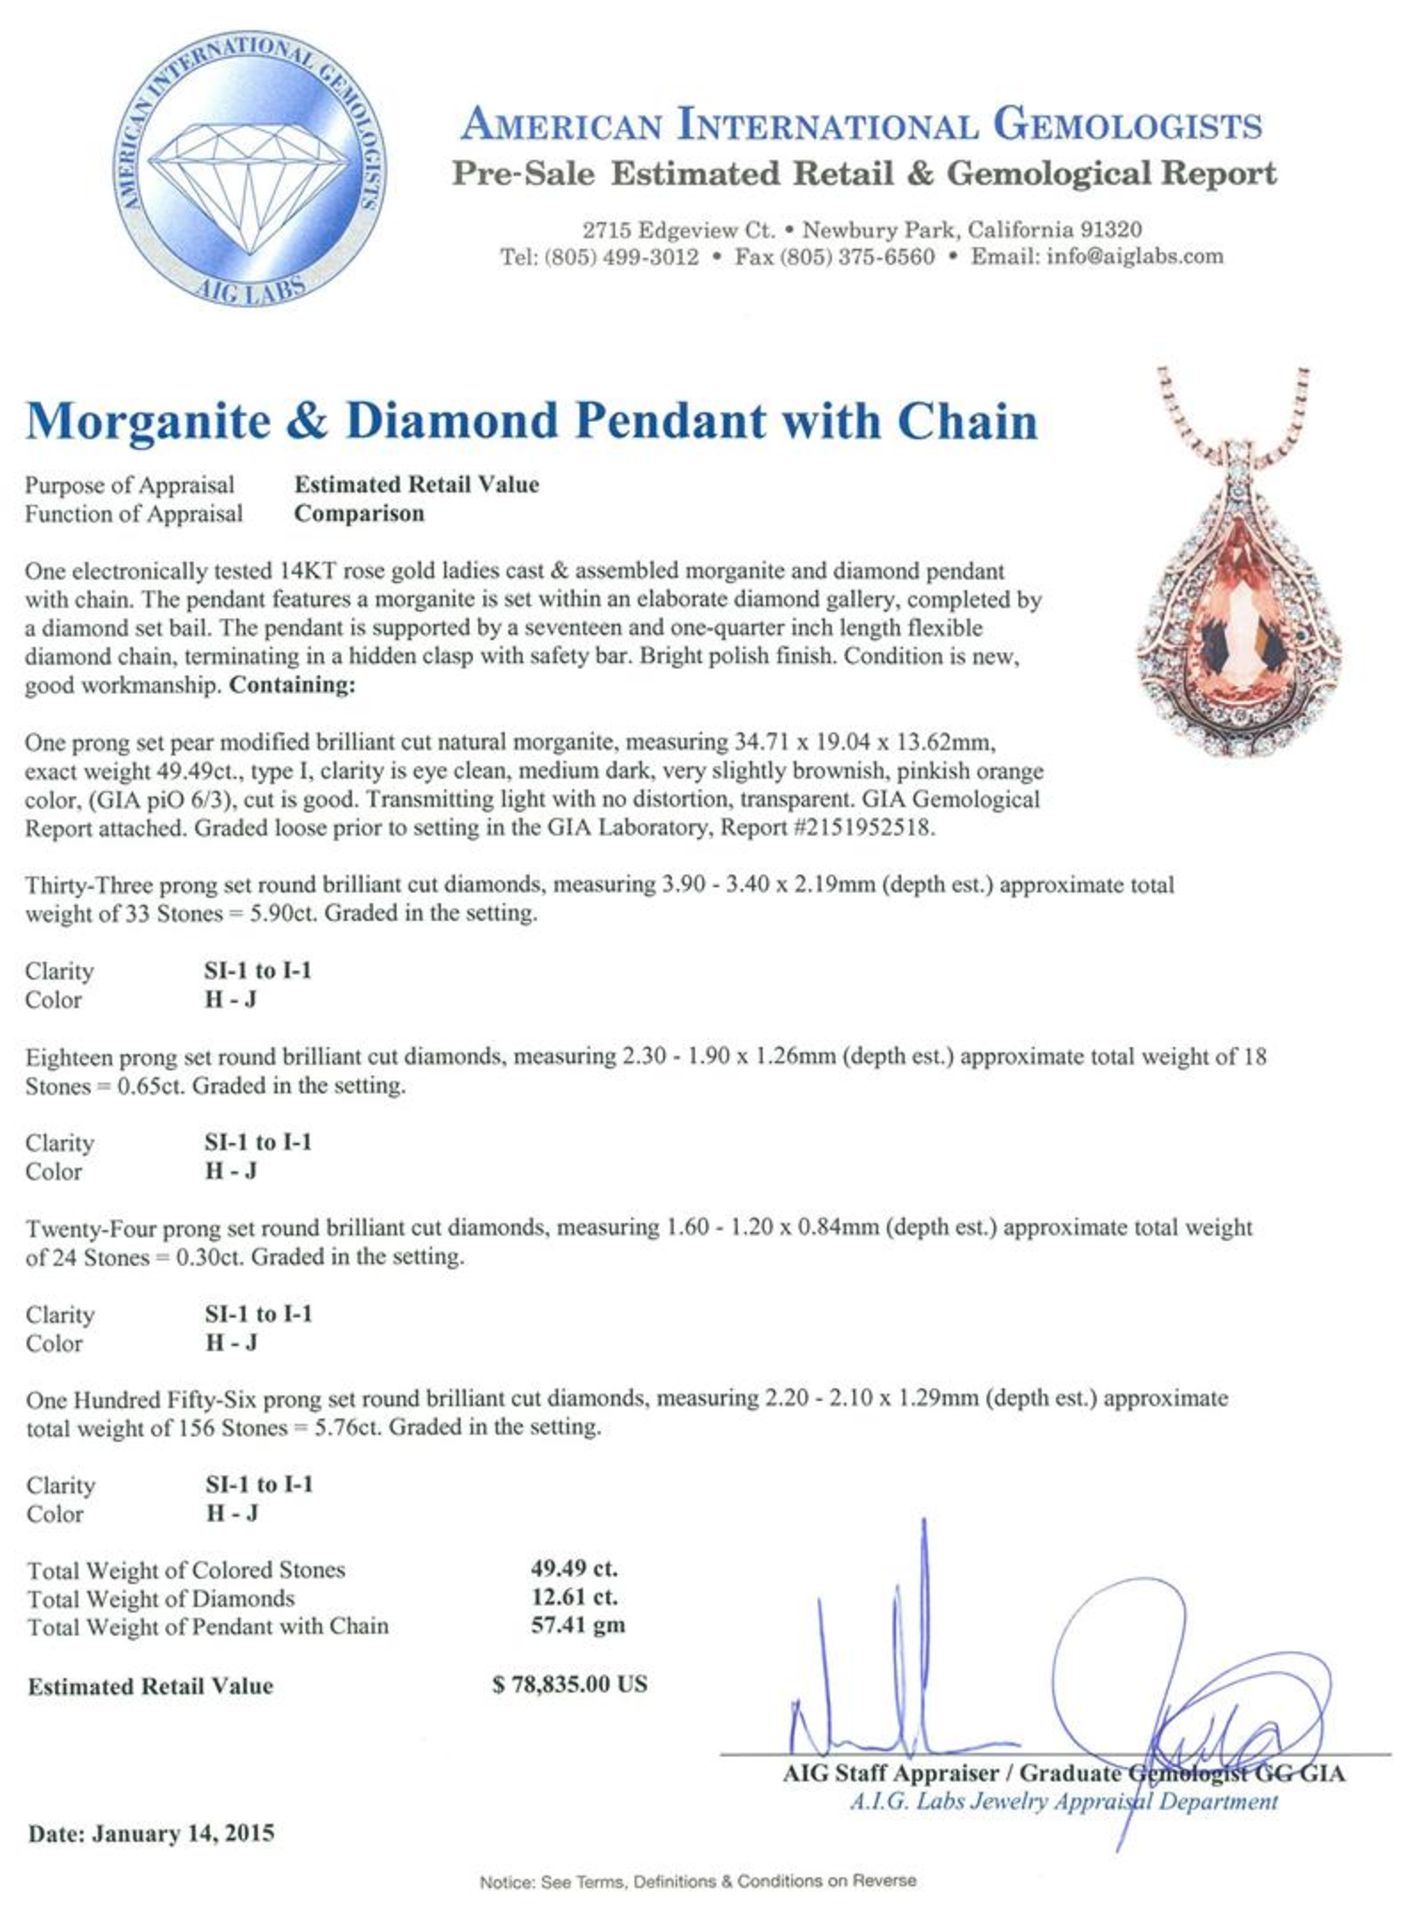 14KT Rose Gold GIA Certified 49.49 ctw Morganite and Diamond Pendant With Chain - Image 3 of 4